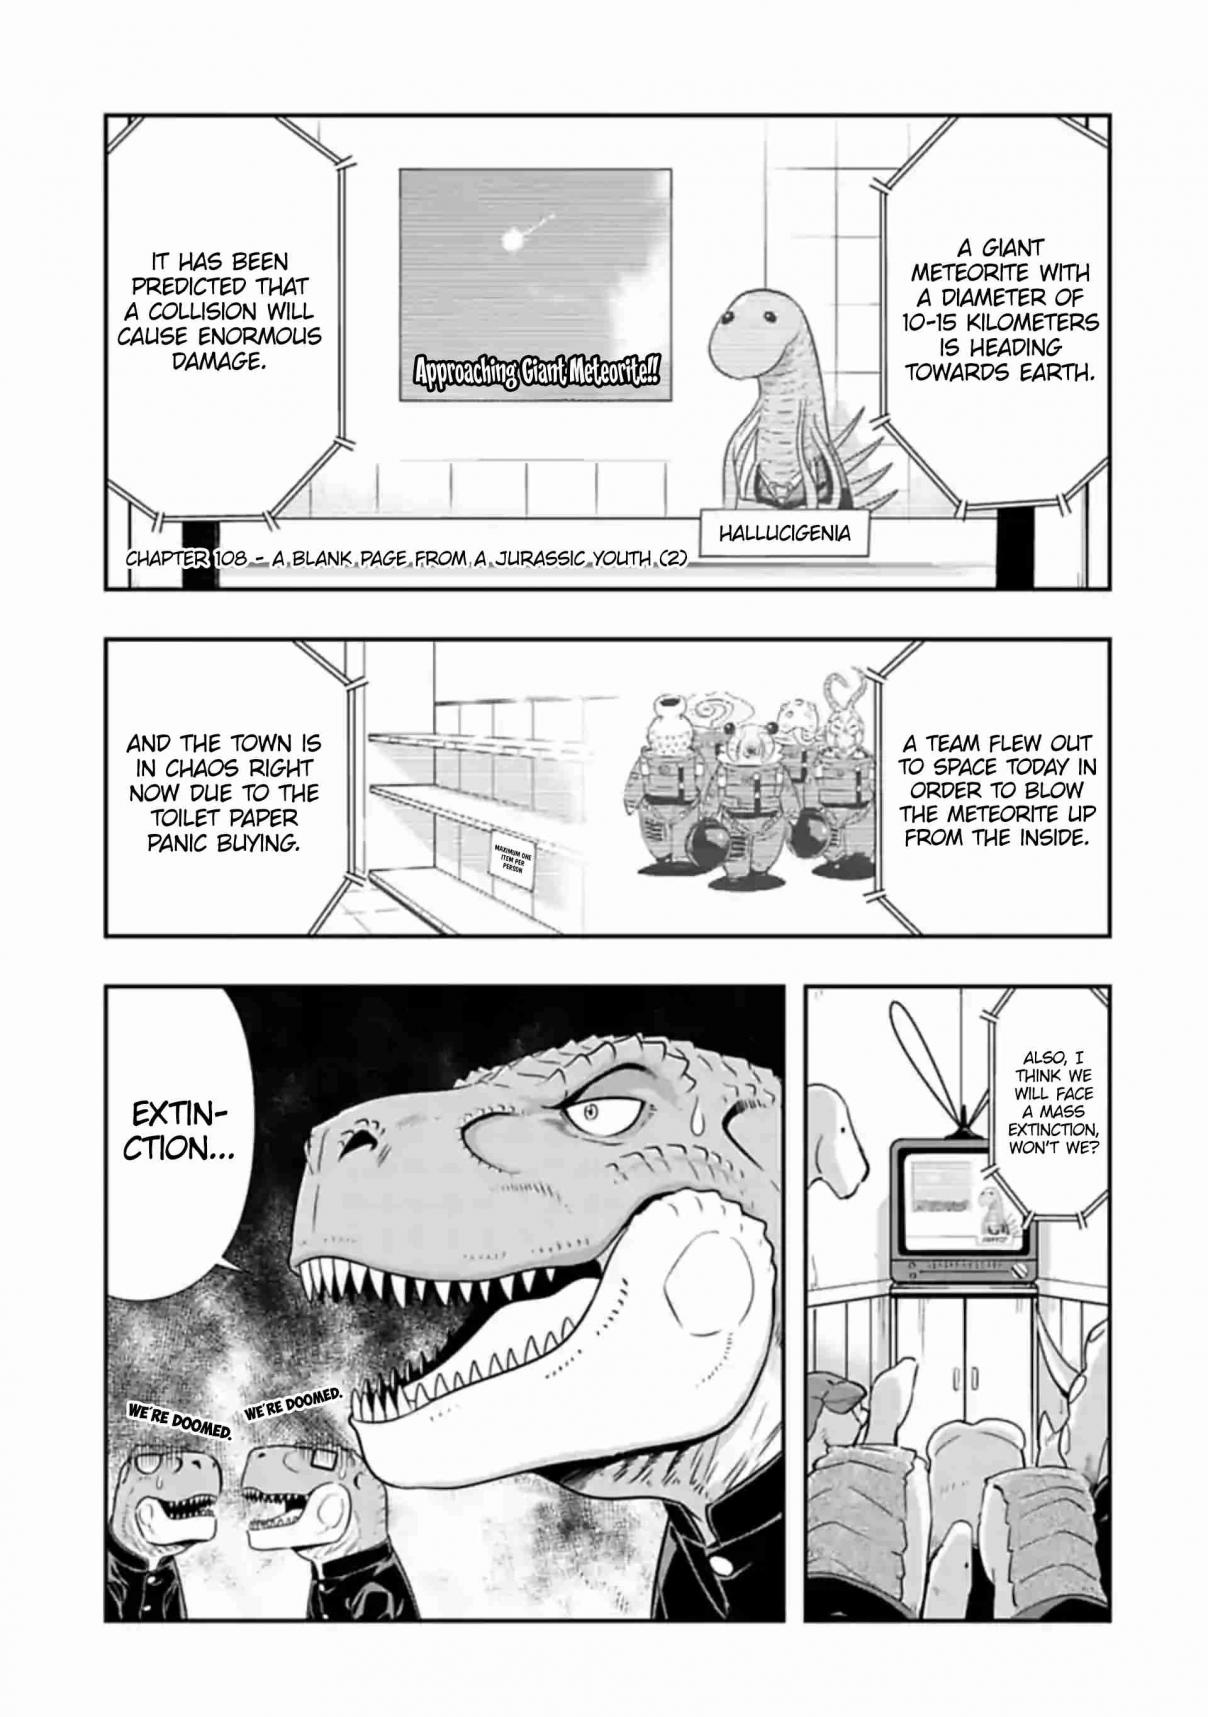 Murenase! Shiiton Gakuen Ch. 108 A Blank Page from a Jurassic Youth (2)